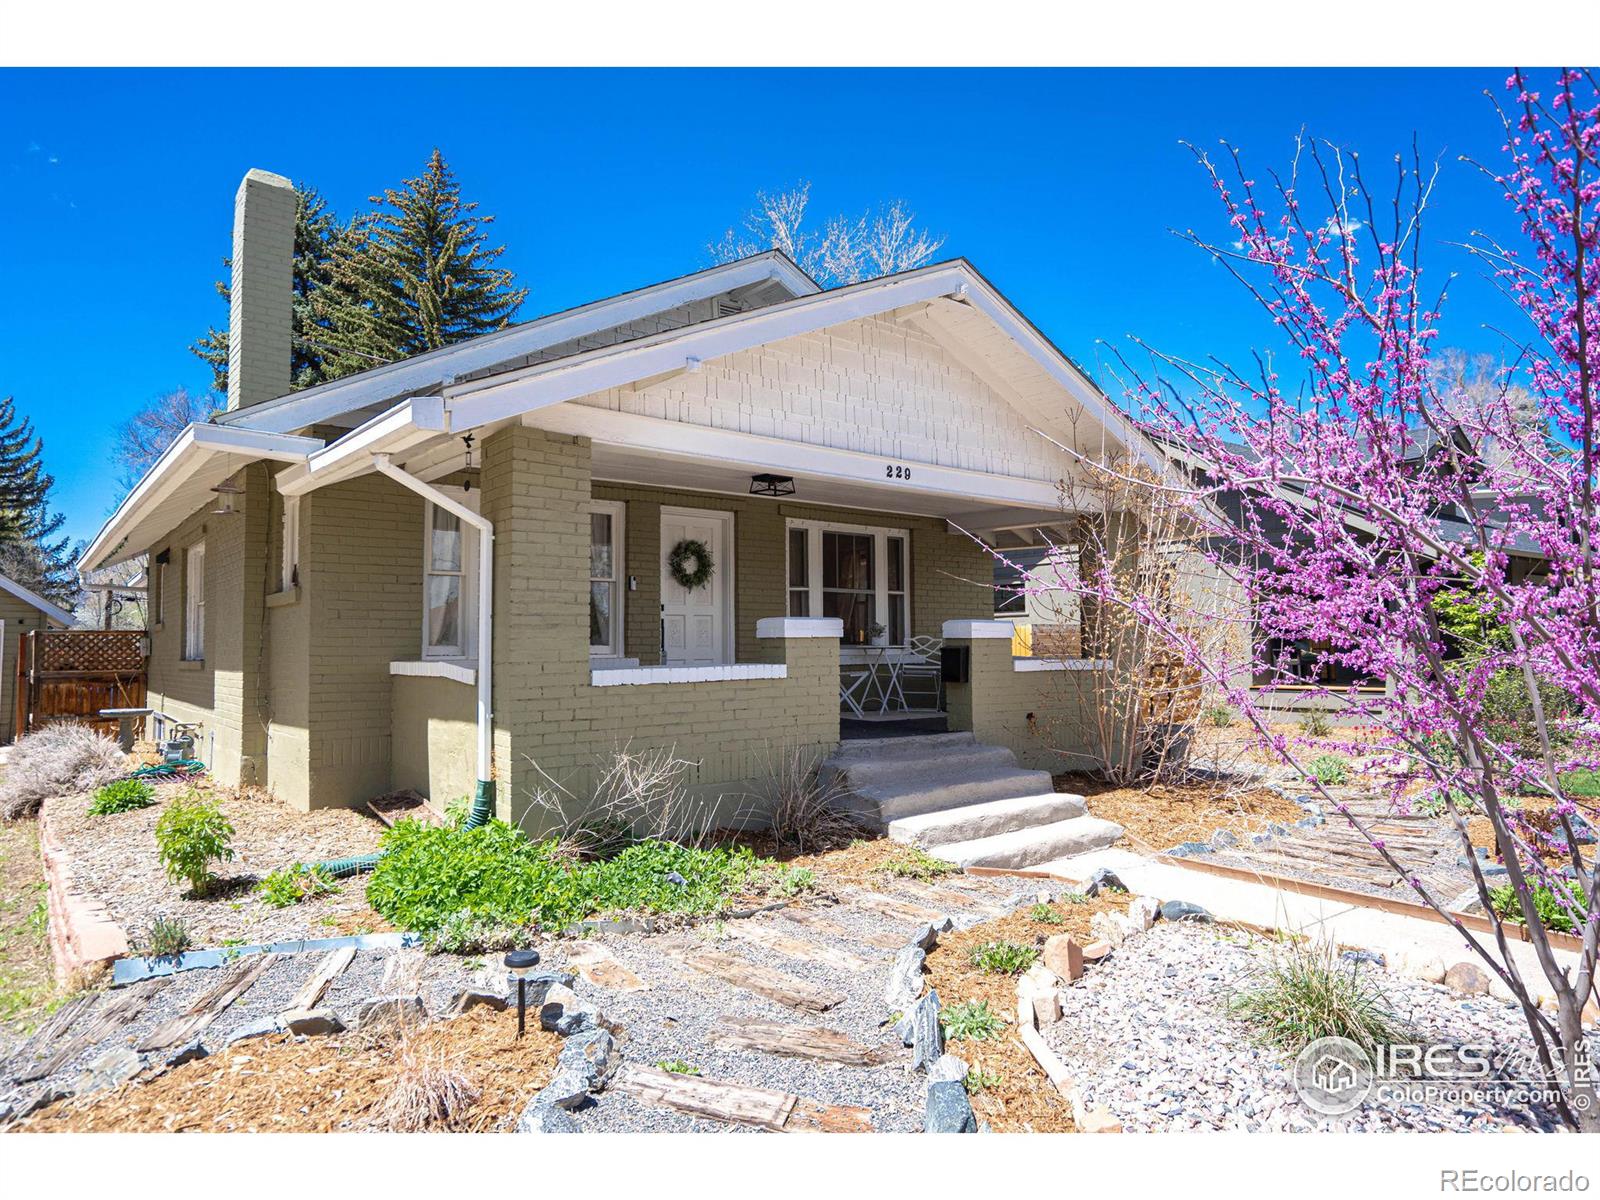 Report Image for 229 N Sherwood Street,Fort Collins, Colorado